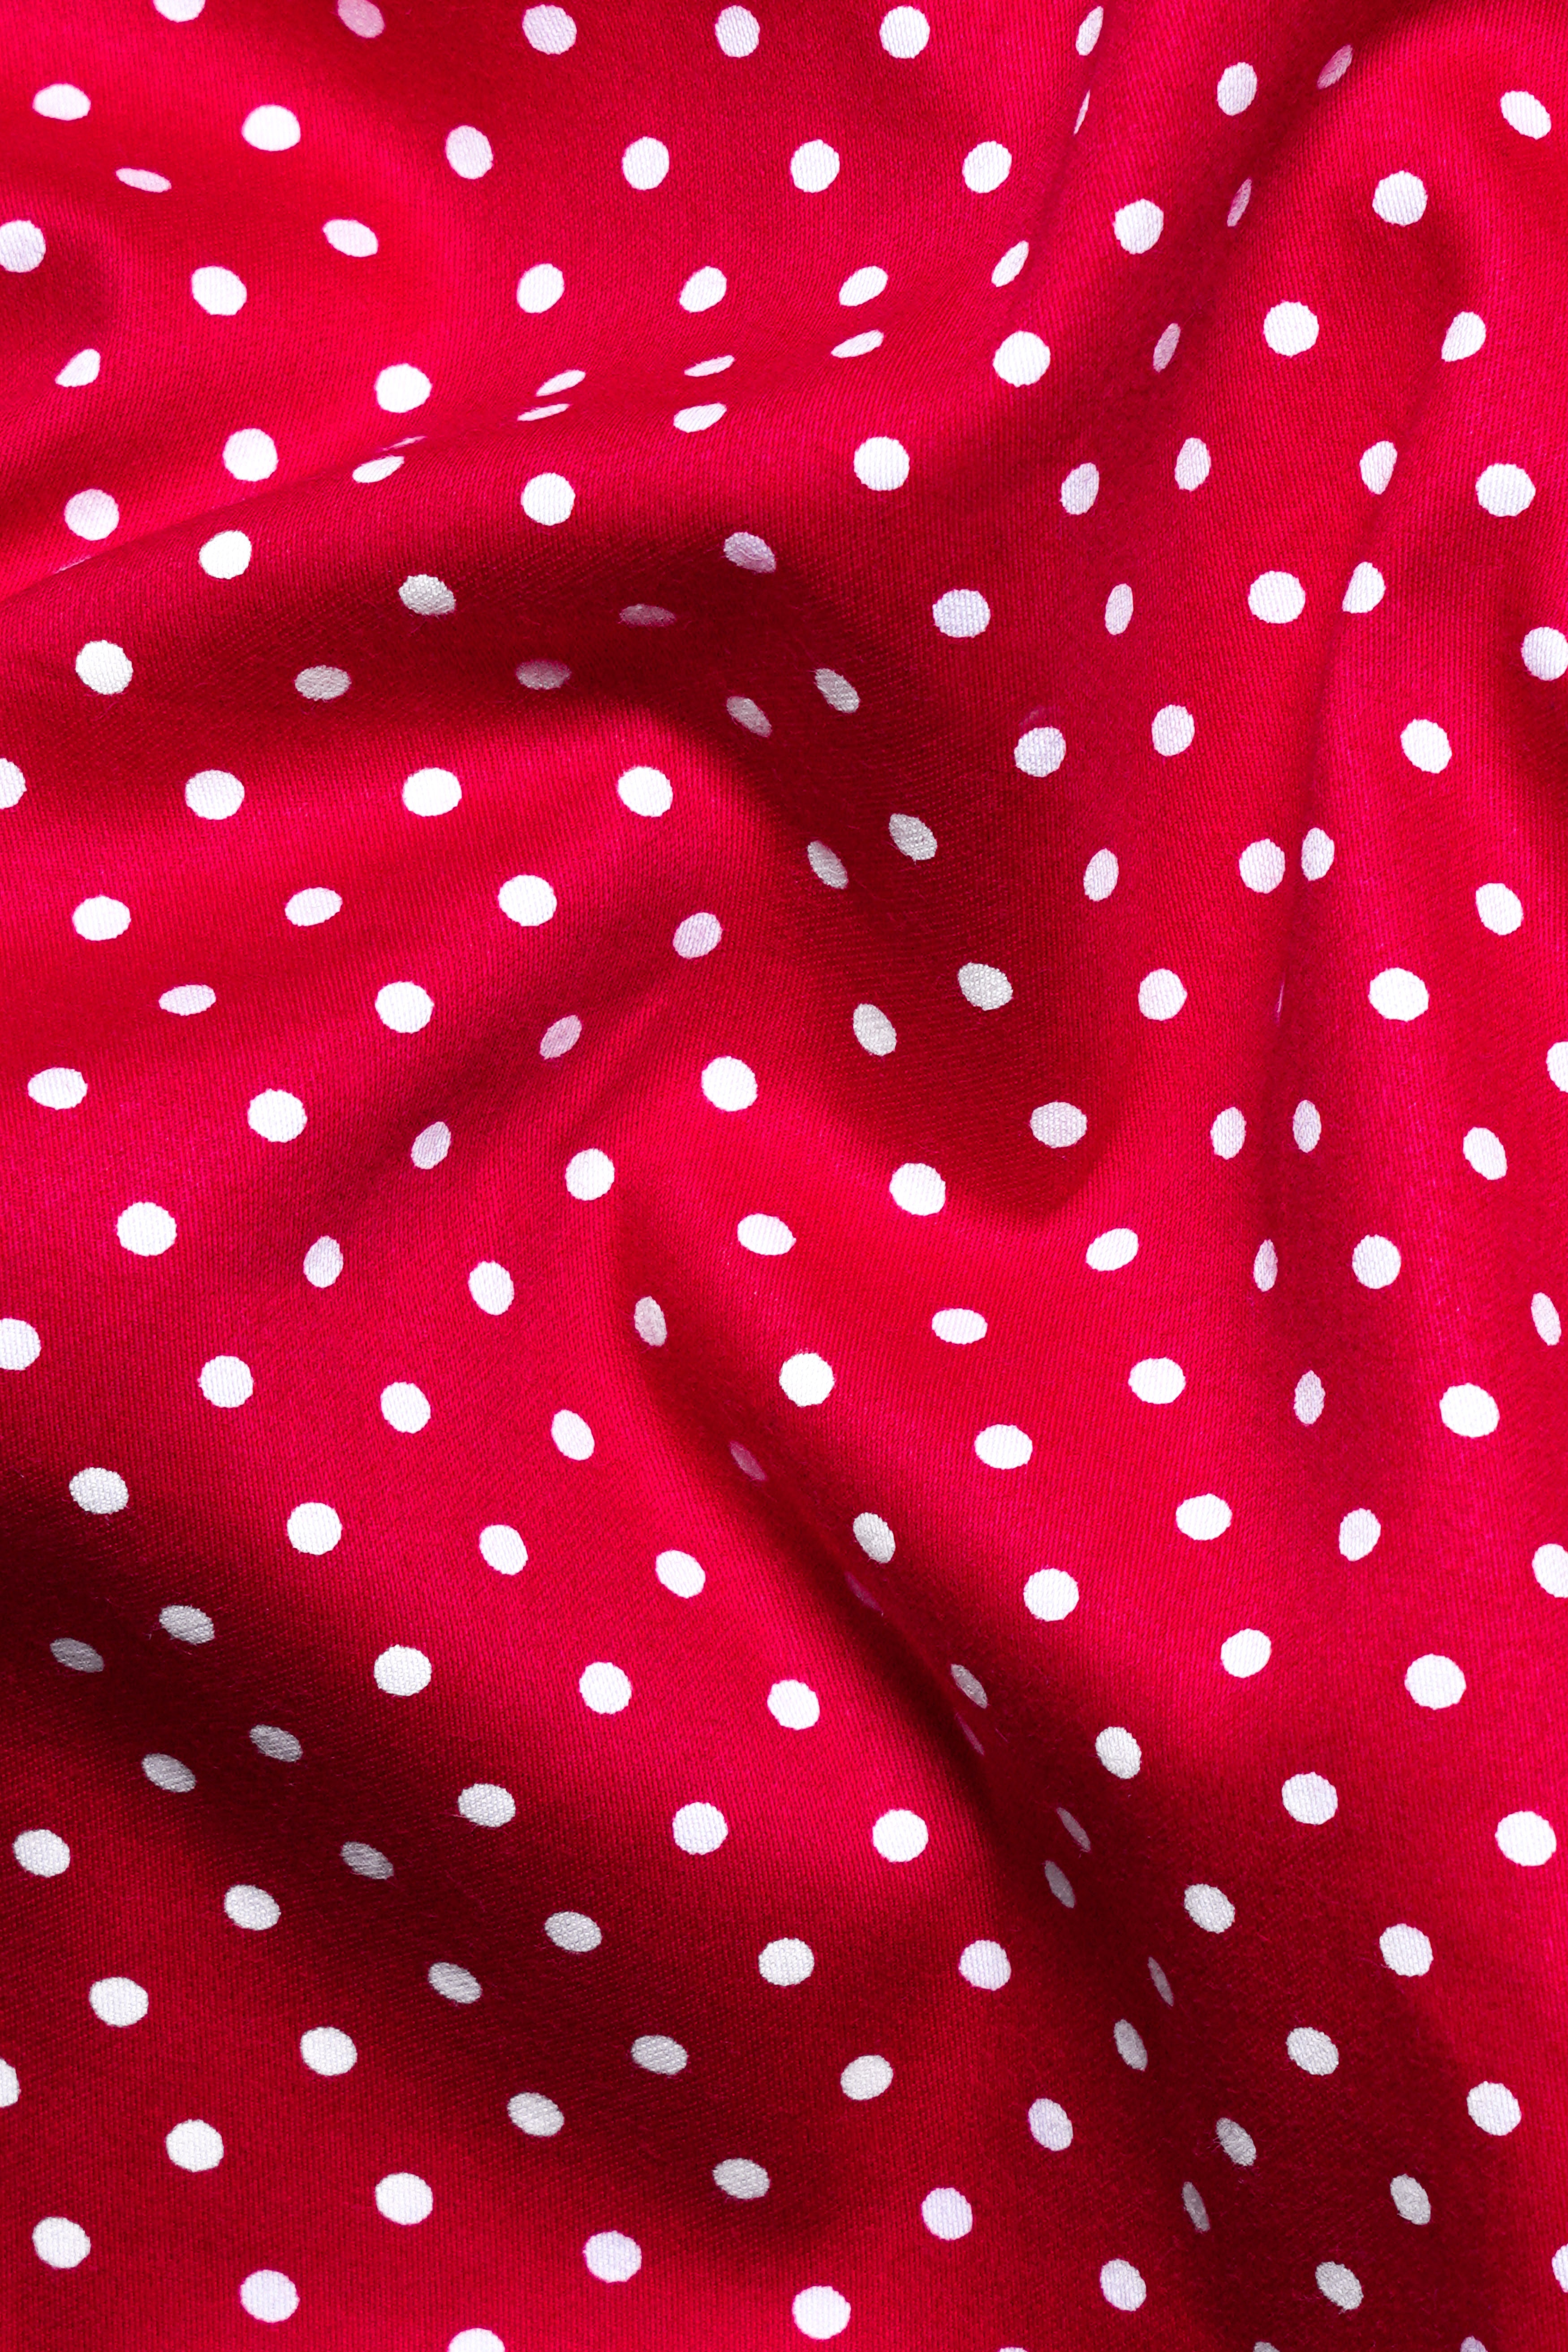 Scarlet Red and White Polka Dotted Premium Cotton Shirt